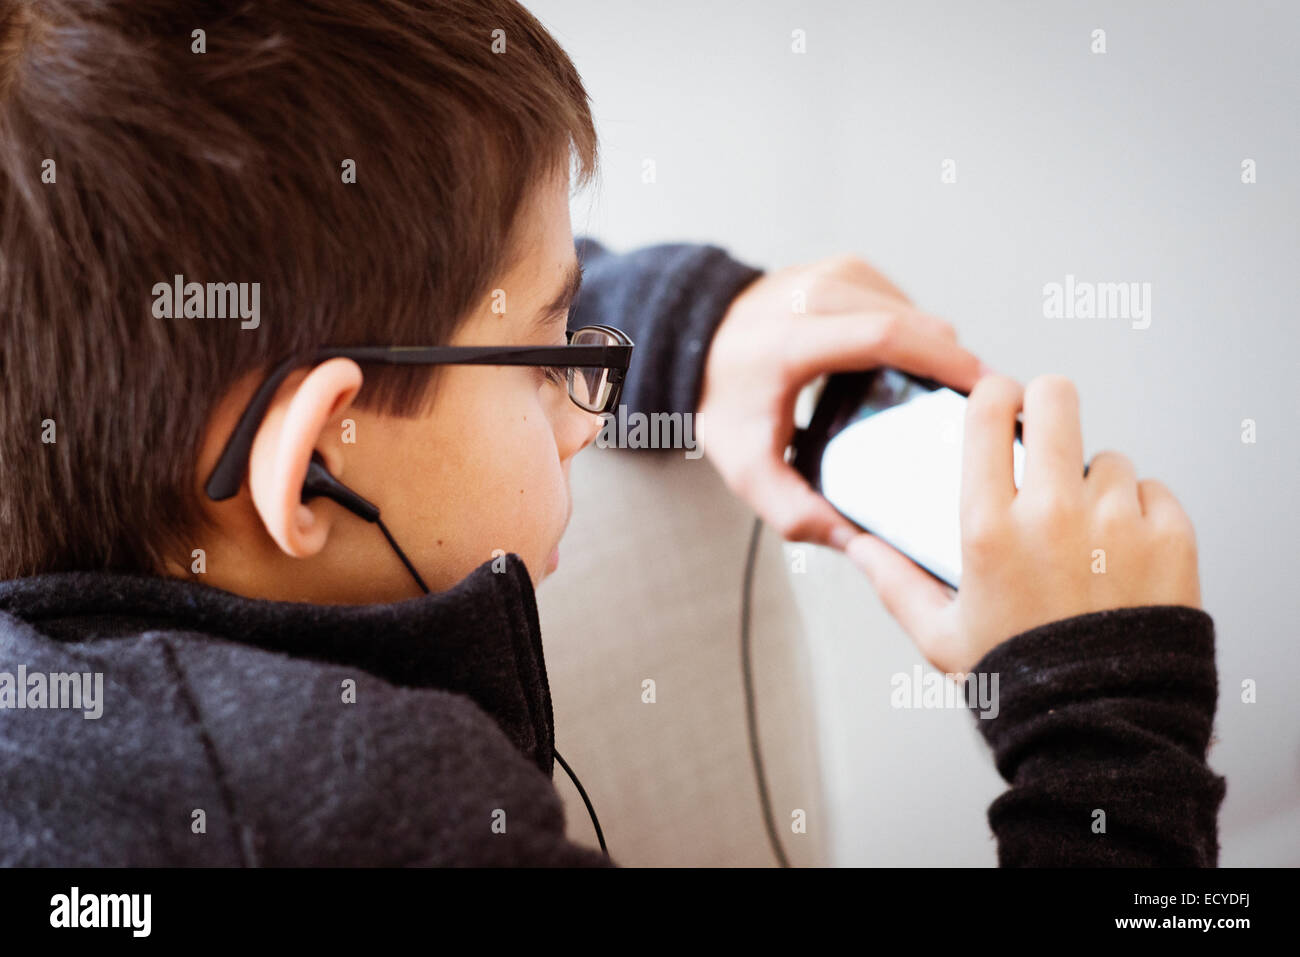 Mixed race boy listening to earbuds and using cell phone Stock Photo